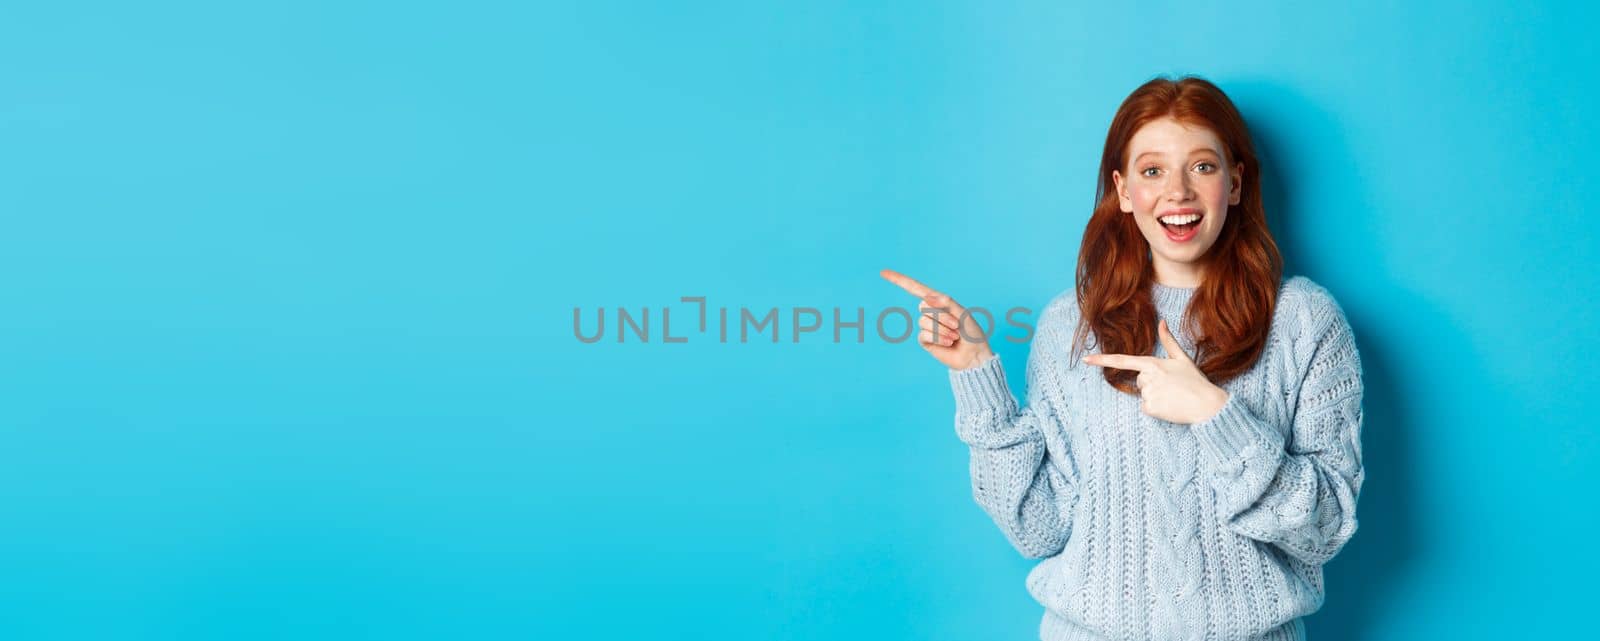 Amazed teenage girl with red hair and freckles, pointing fingers left at logo and smiling, showing advertisement, standing over blue background.